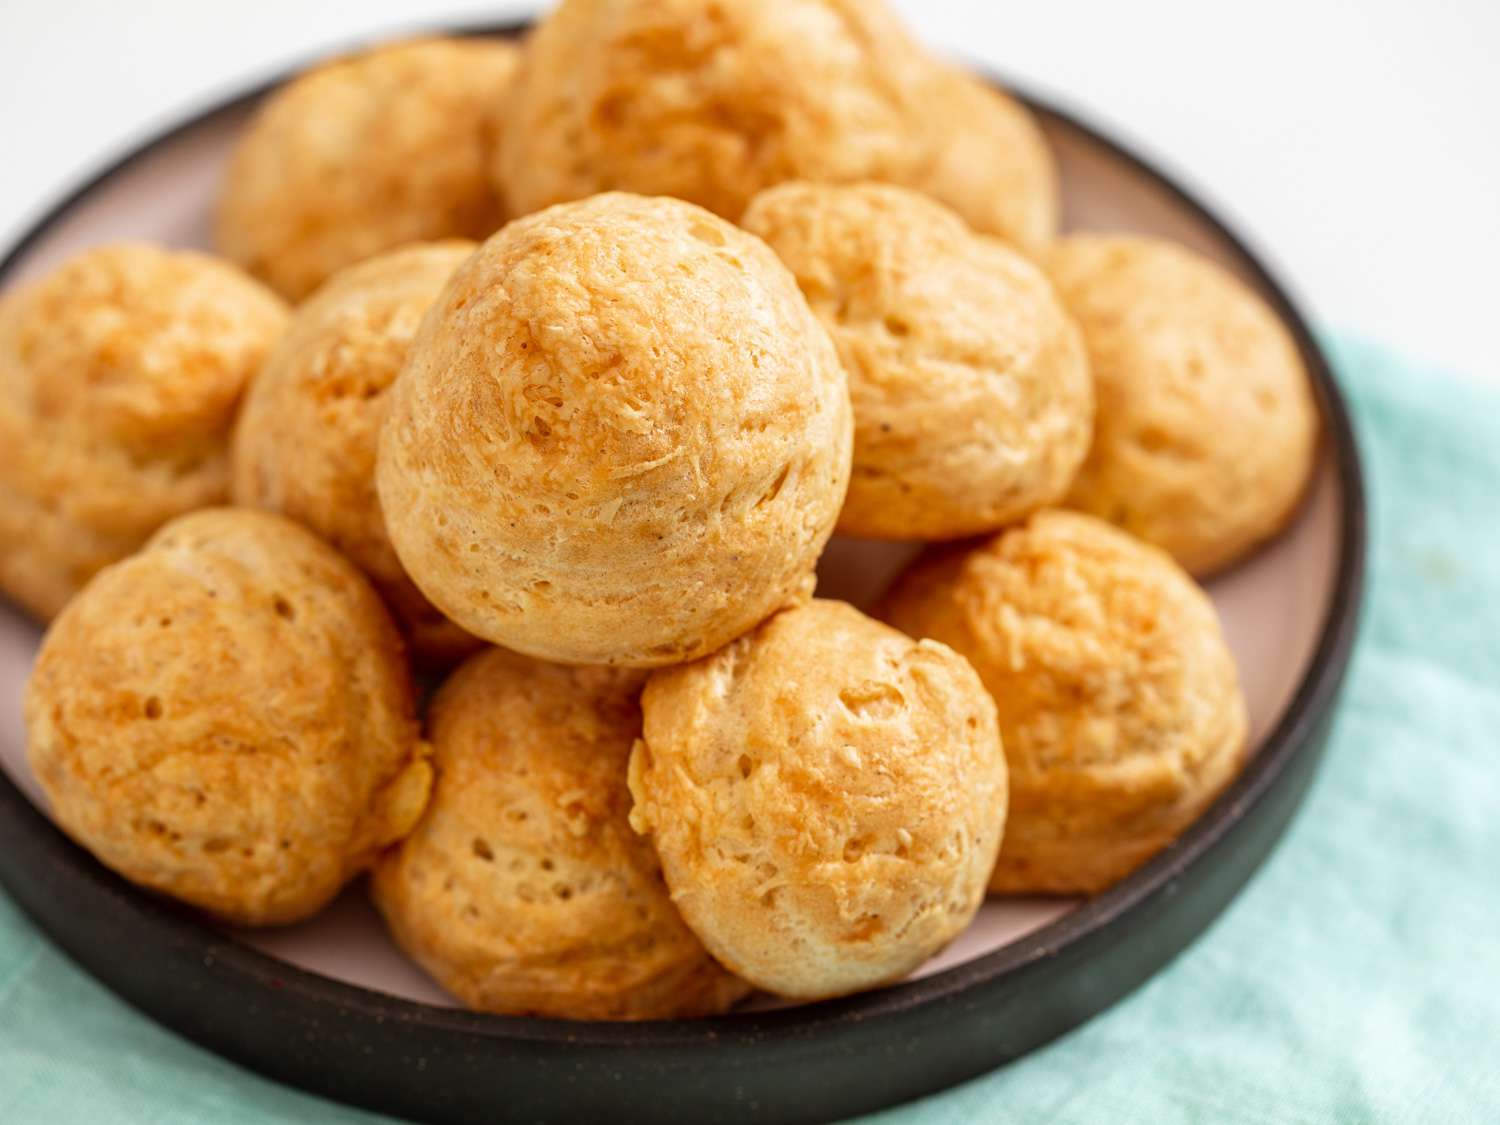 A pile of gougères resting on a plate